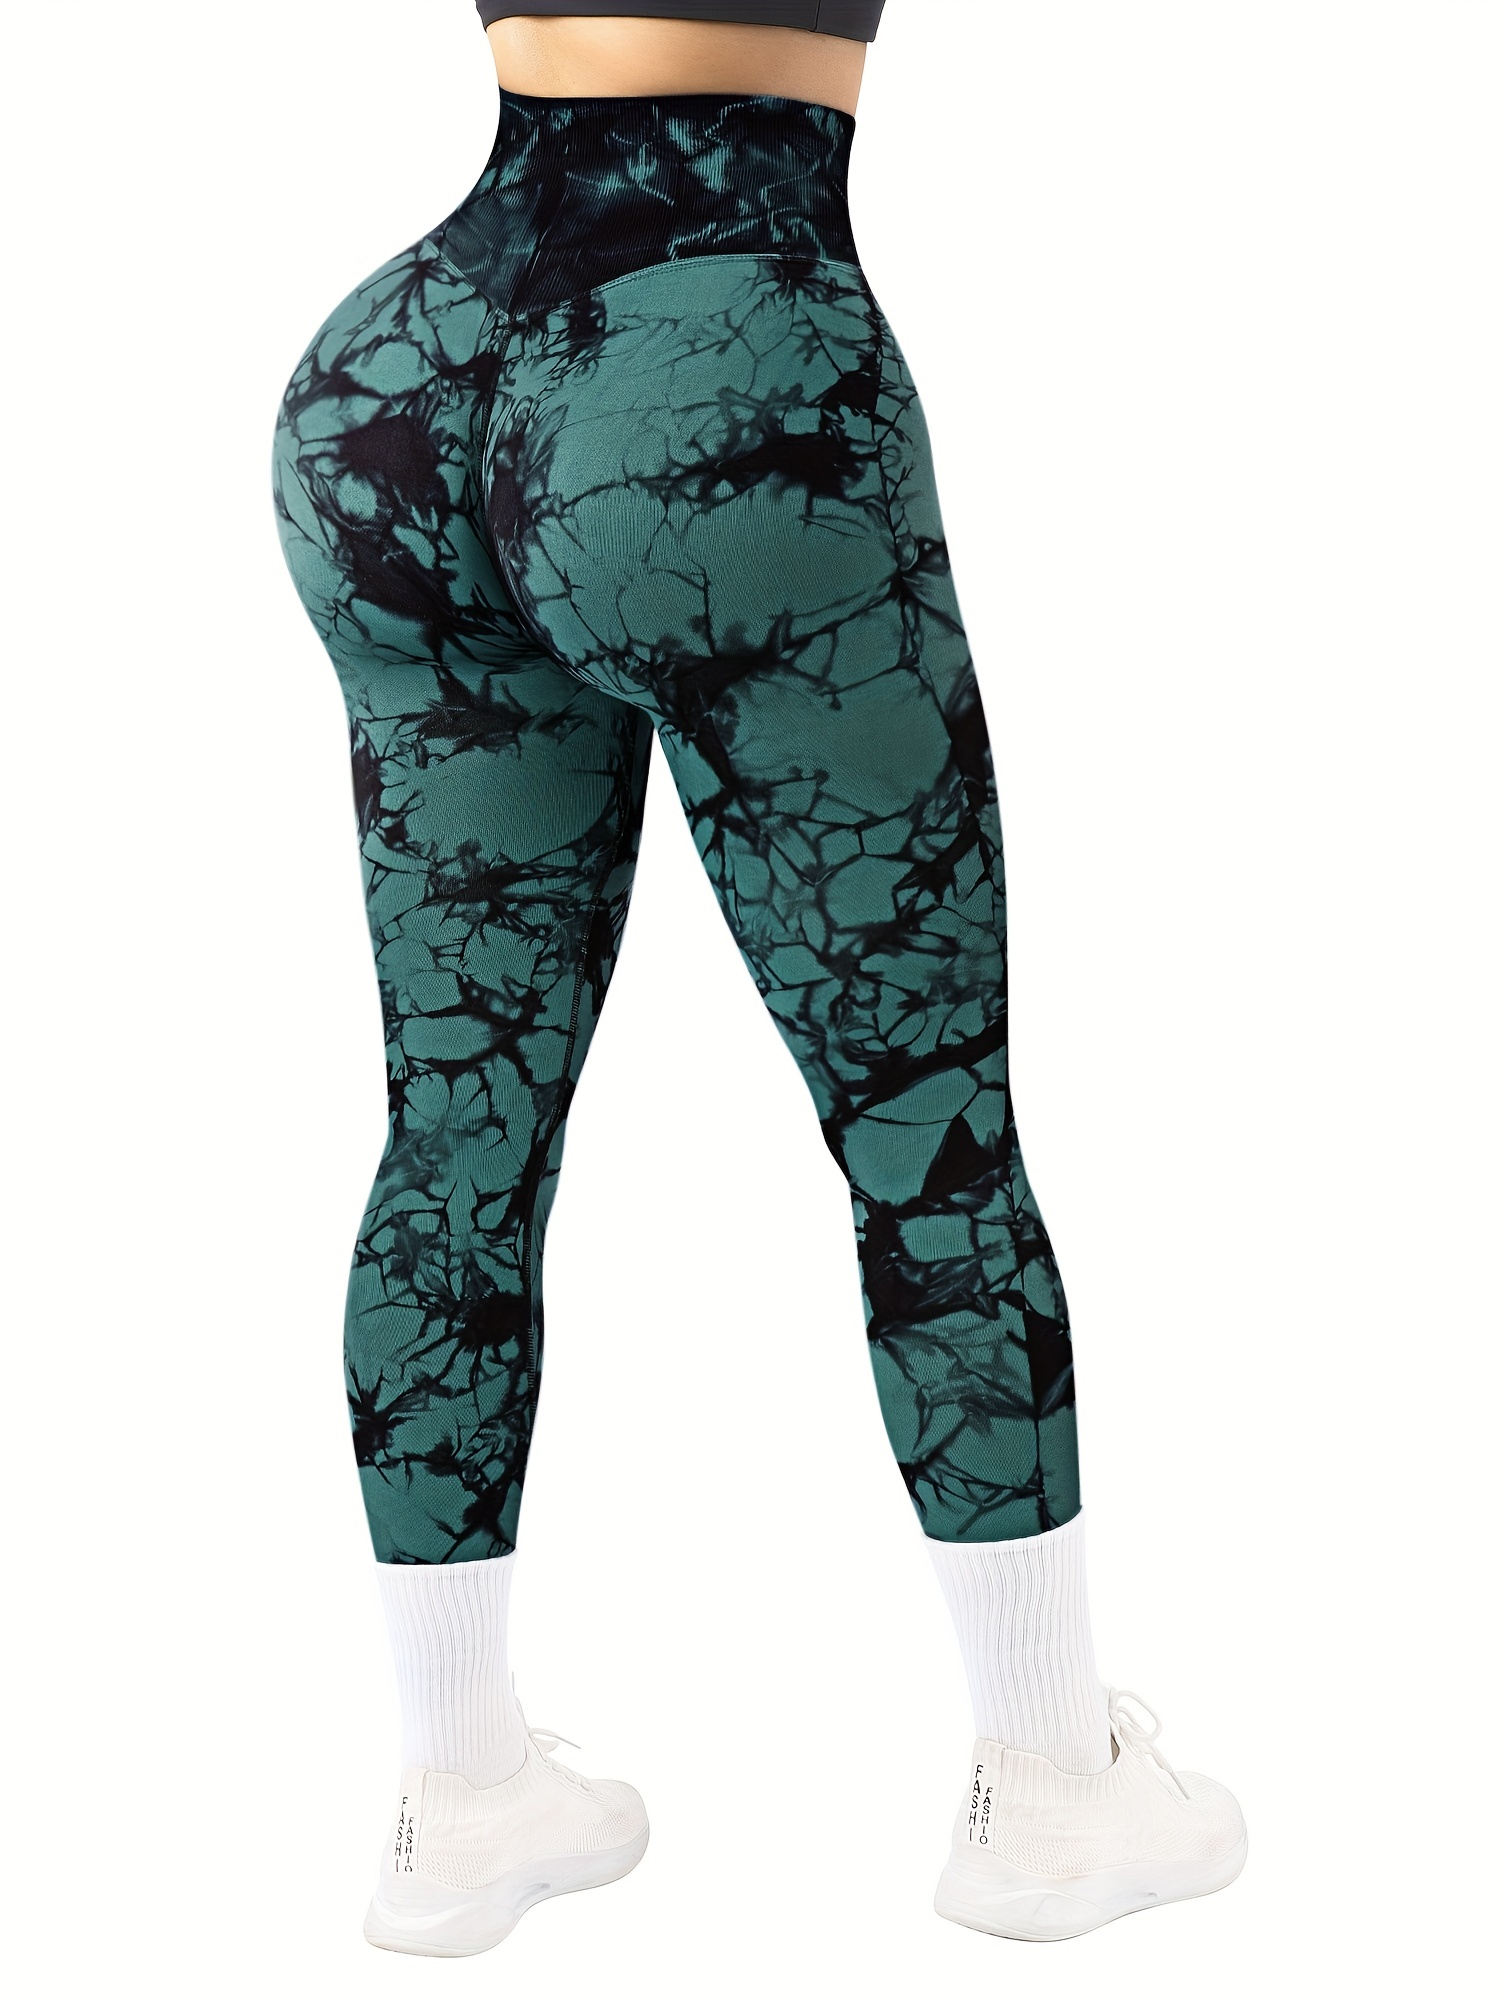 Women Leggings Ultra Fine Brushed Nude Camo Print High Waist and Hips Thin  Fitness Sports Yoga Pants with Pockets